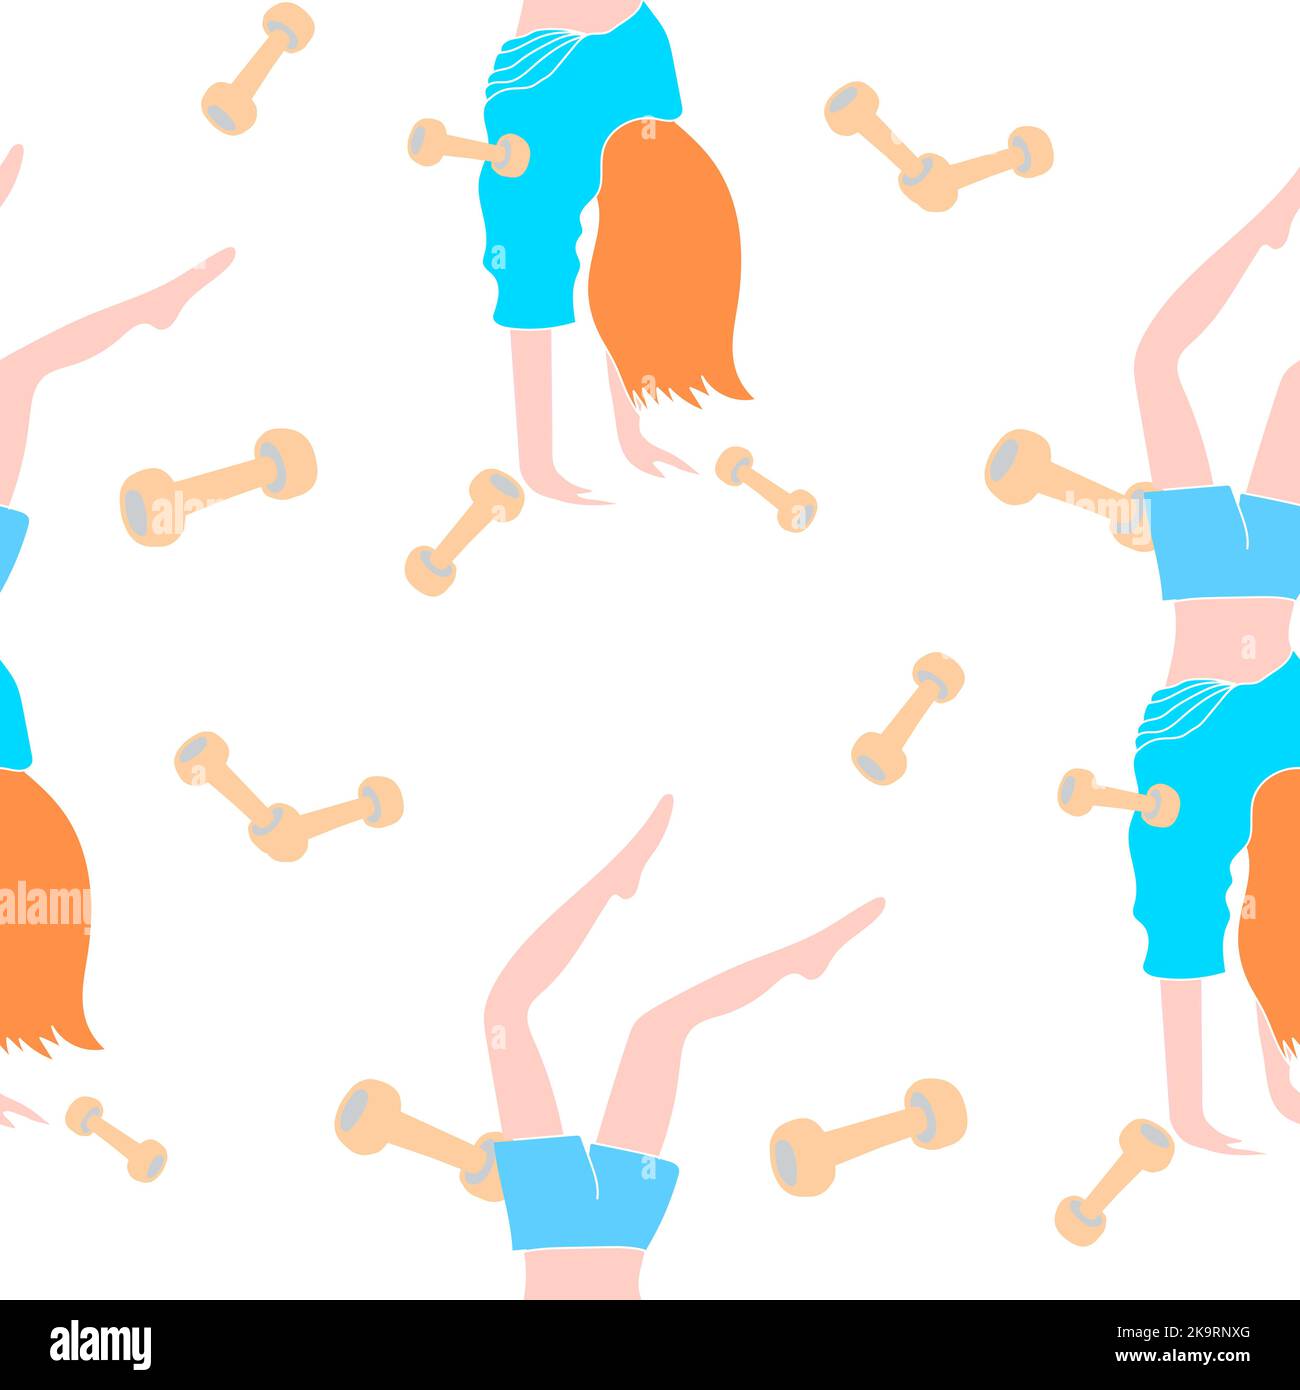 Seamless pattern. Woman with red hair in blue dress doing her headstands. Sport fitness colorful background with dumbbells. Stock Vector